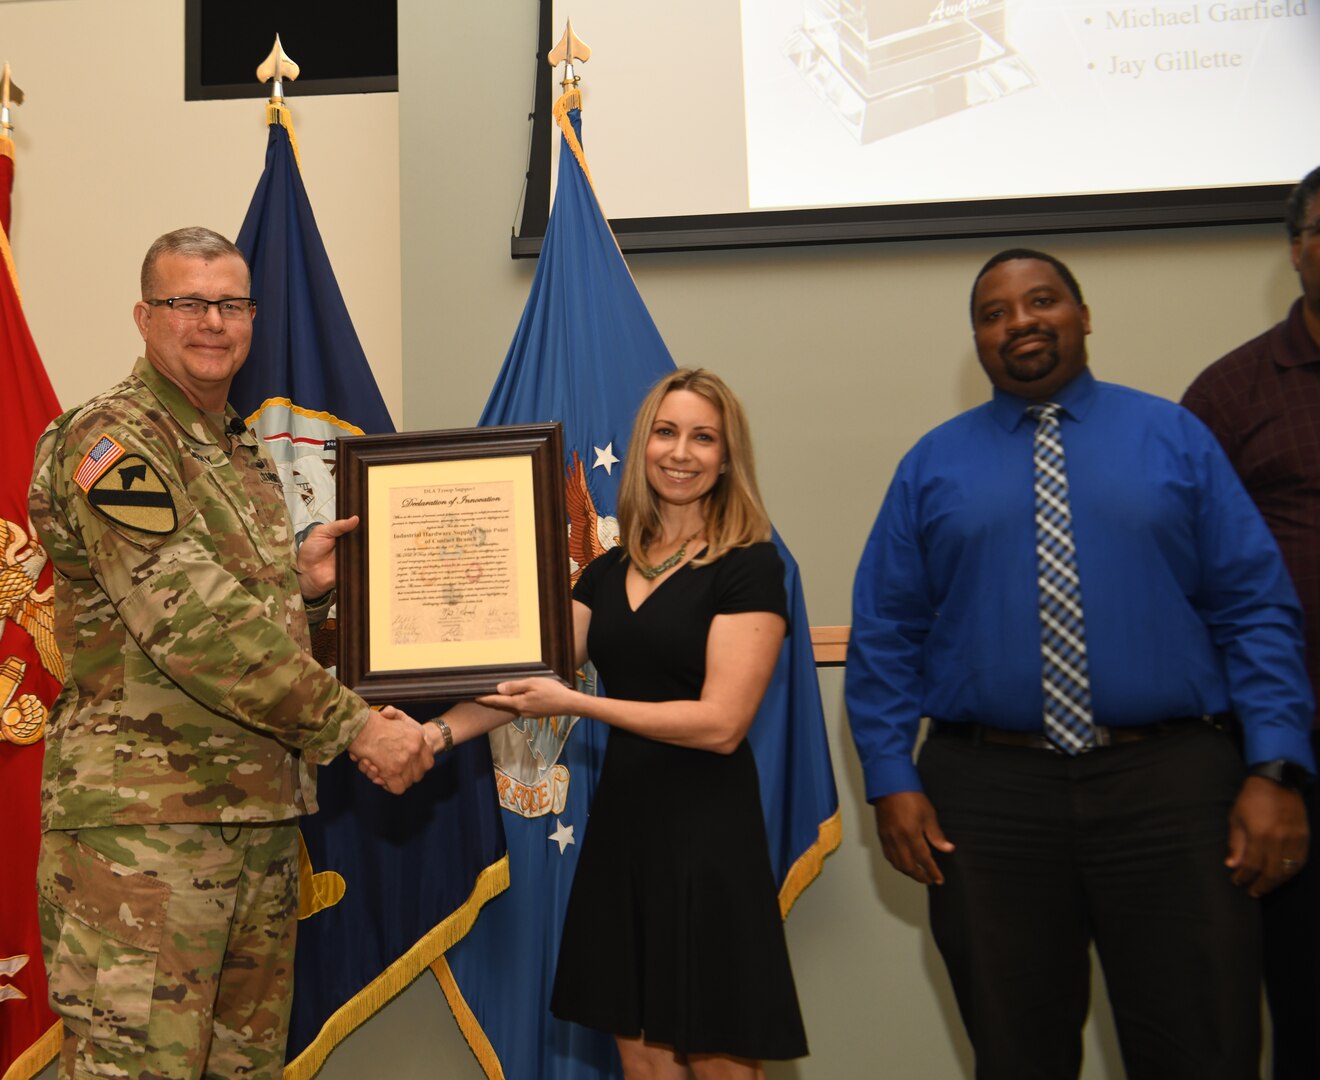 Defense Logistics Agency Troop Support commander Army Brig. Gen. Mark Simerly presents the DLA Troop Support Declaration of Innovation to the Industrial Hardware supply chain’s Supply Chain Point of Contact team during a town hall in Philadelphia, June 11, 2019. The Supply Chain Point of Contact team was recognized for streamlining project data to effectively engage all of the supply chain’s internal functional areas to collaborate on corrective actions by creating a standardized storyboard presentation for projects. (Photo by Ed Maldonado /DLA Troop Support)